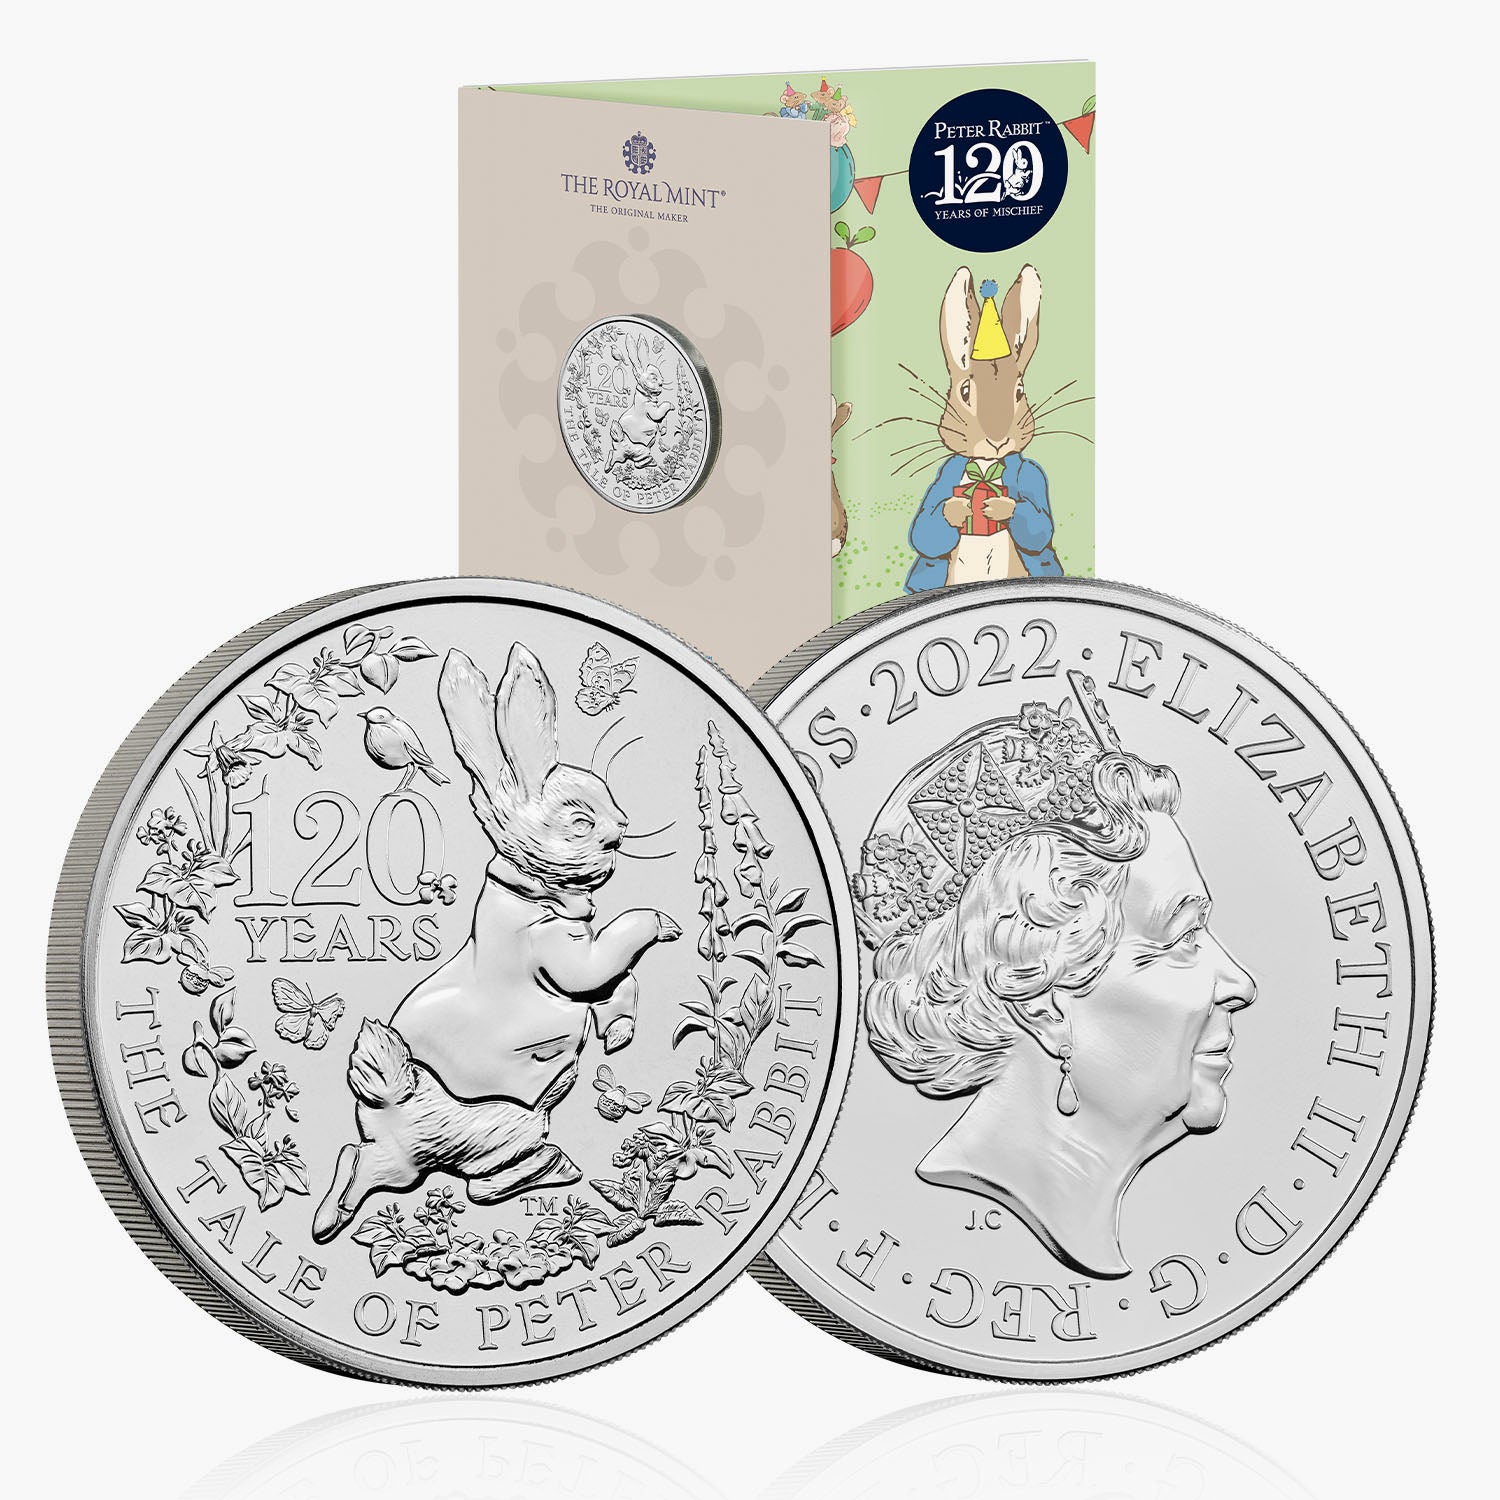 The Tale of Peter Rabbit 2022 UK £5 Brilliant Uncirculated Coin